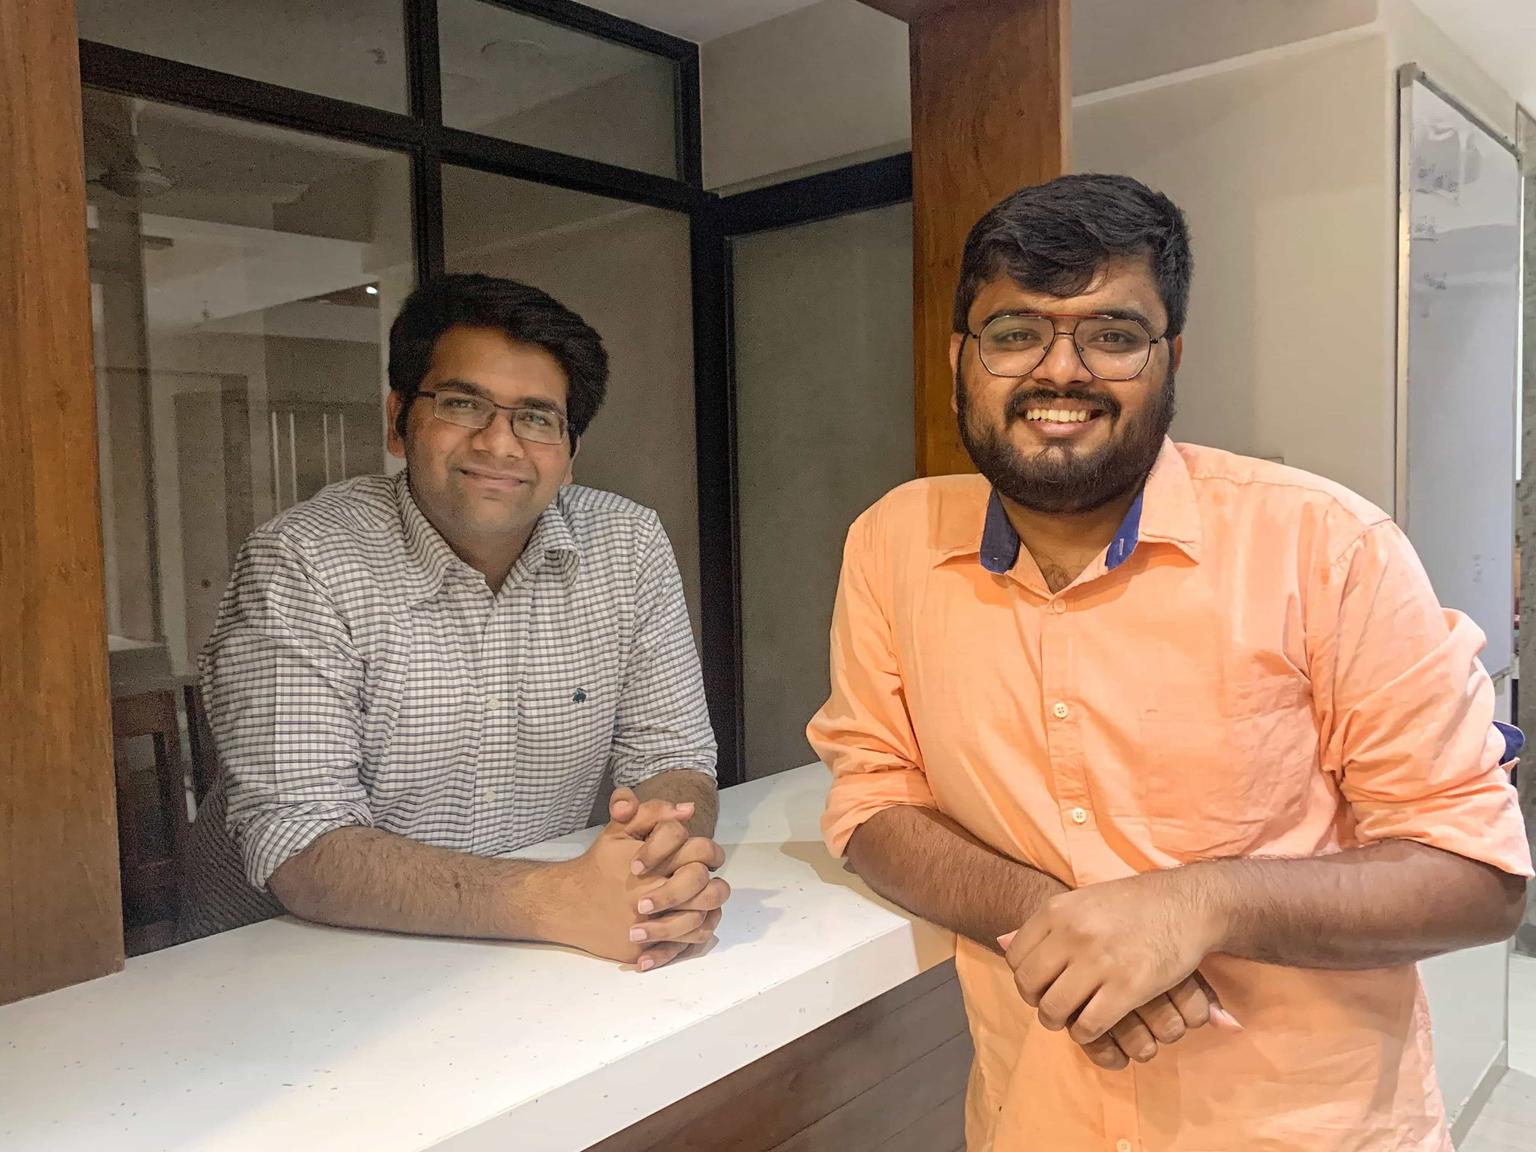 Pepper Content raises $4.2 million led by Lightspeed India to expand to text, design, audio, and video content in India and Southeast Asia